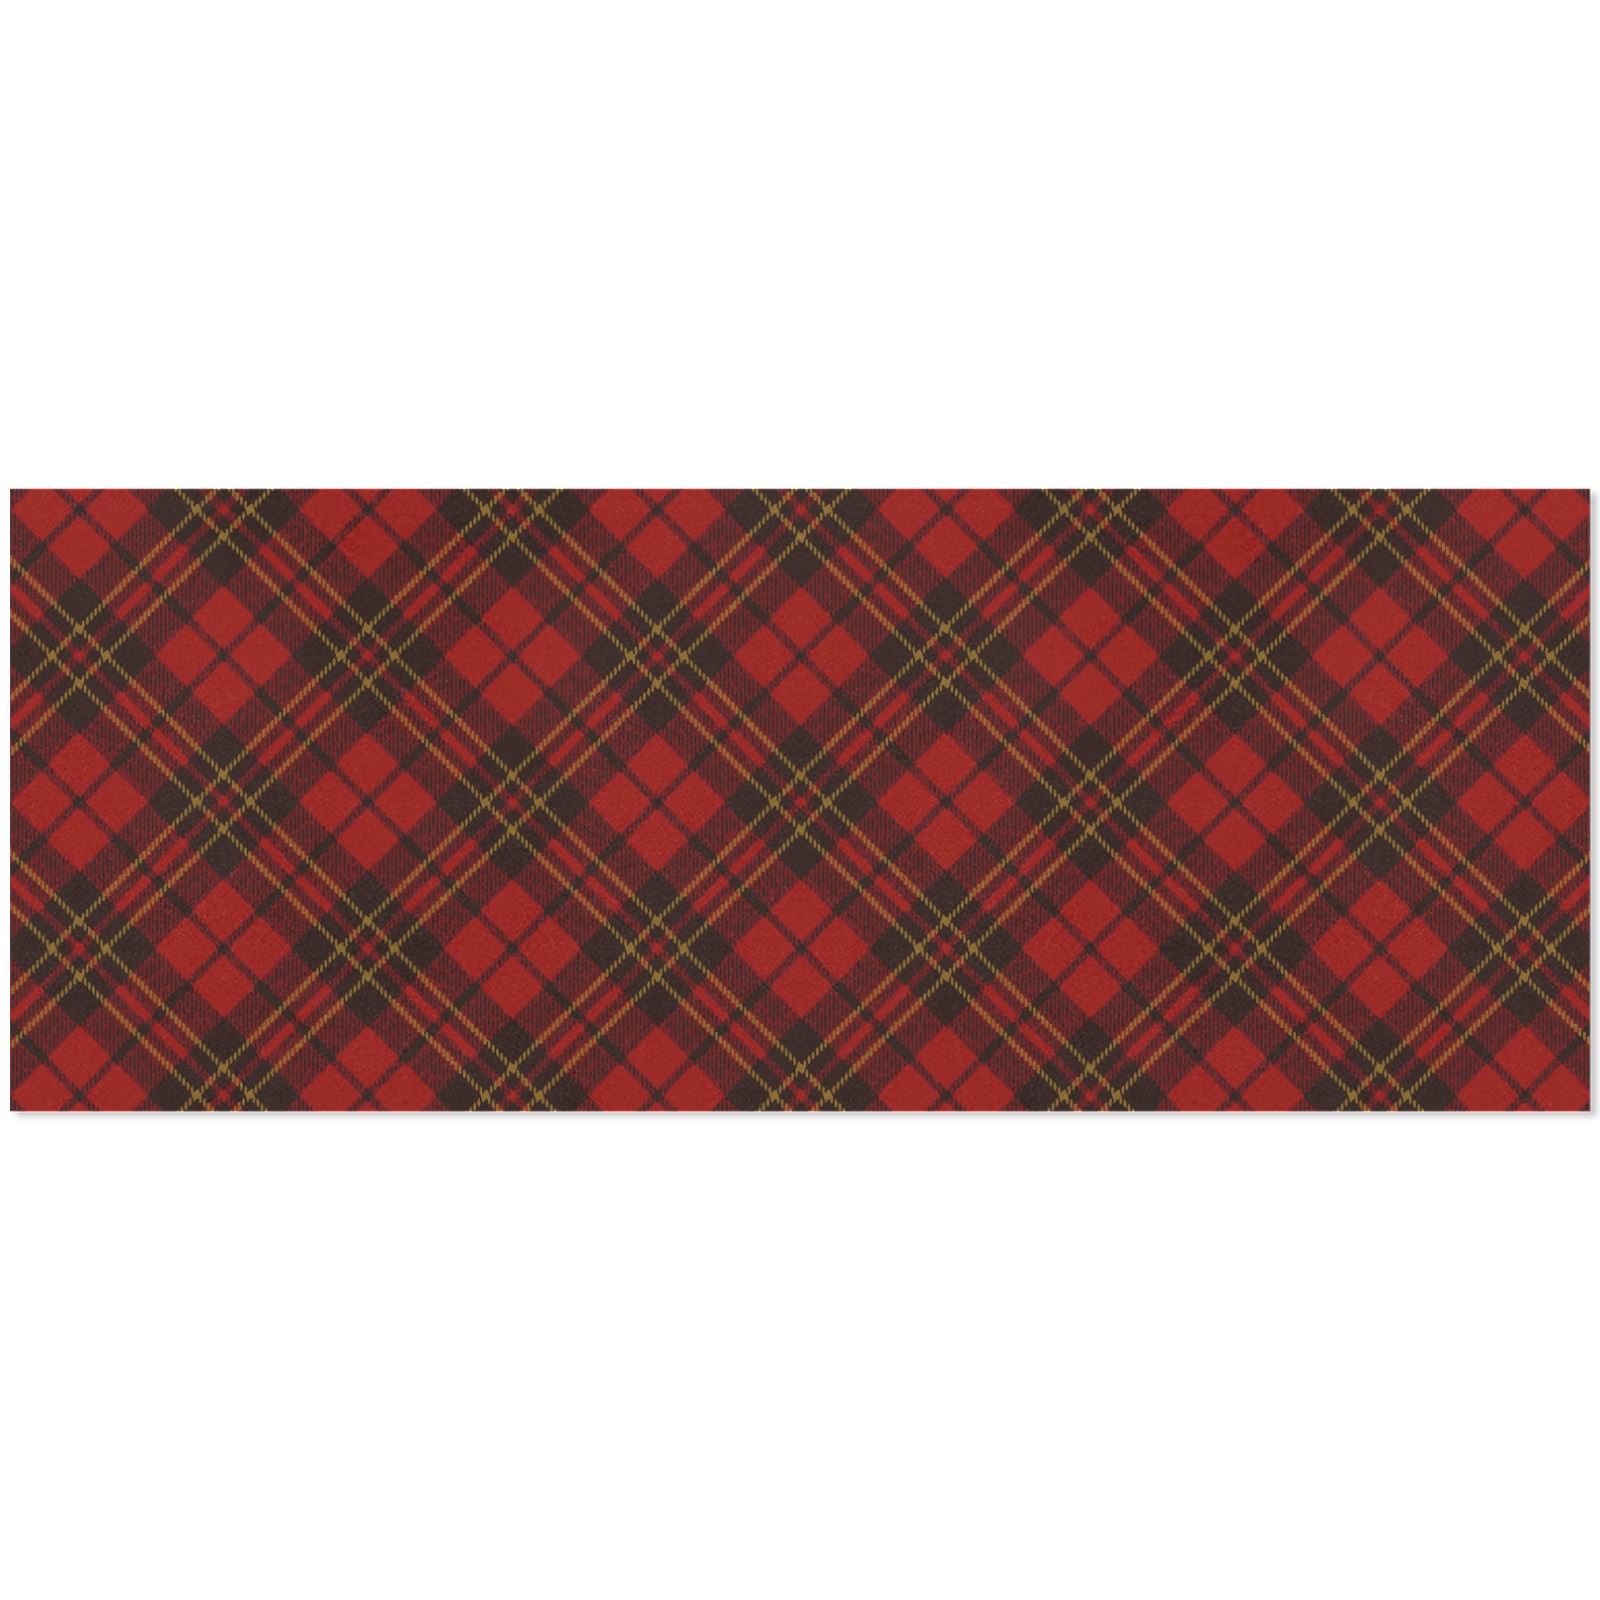 Red tartan plaid winter Christmas pattern holidays Gift Wrapping Paper 58"x 23" (1 Roll)